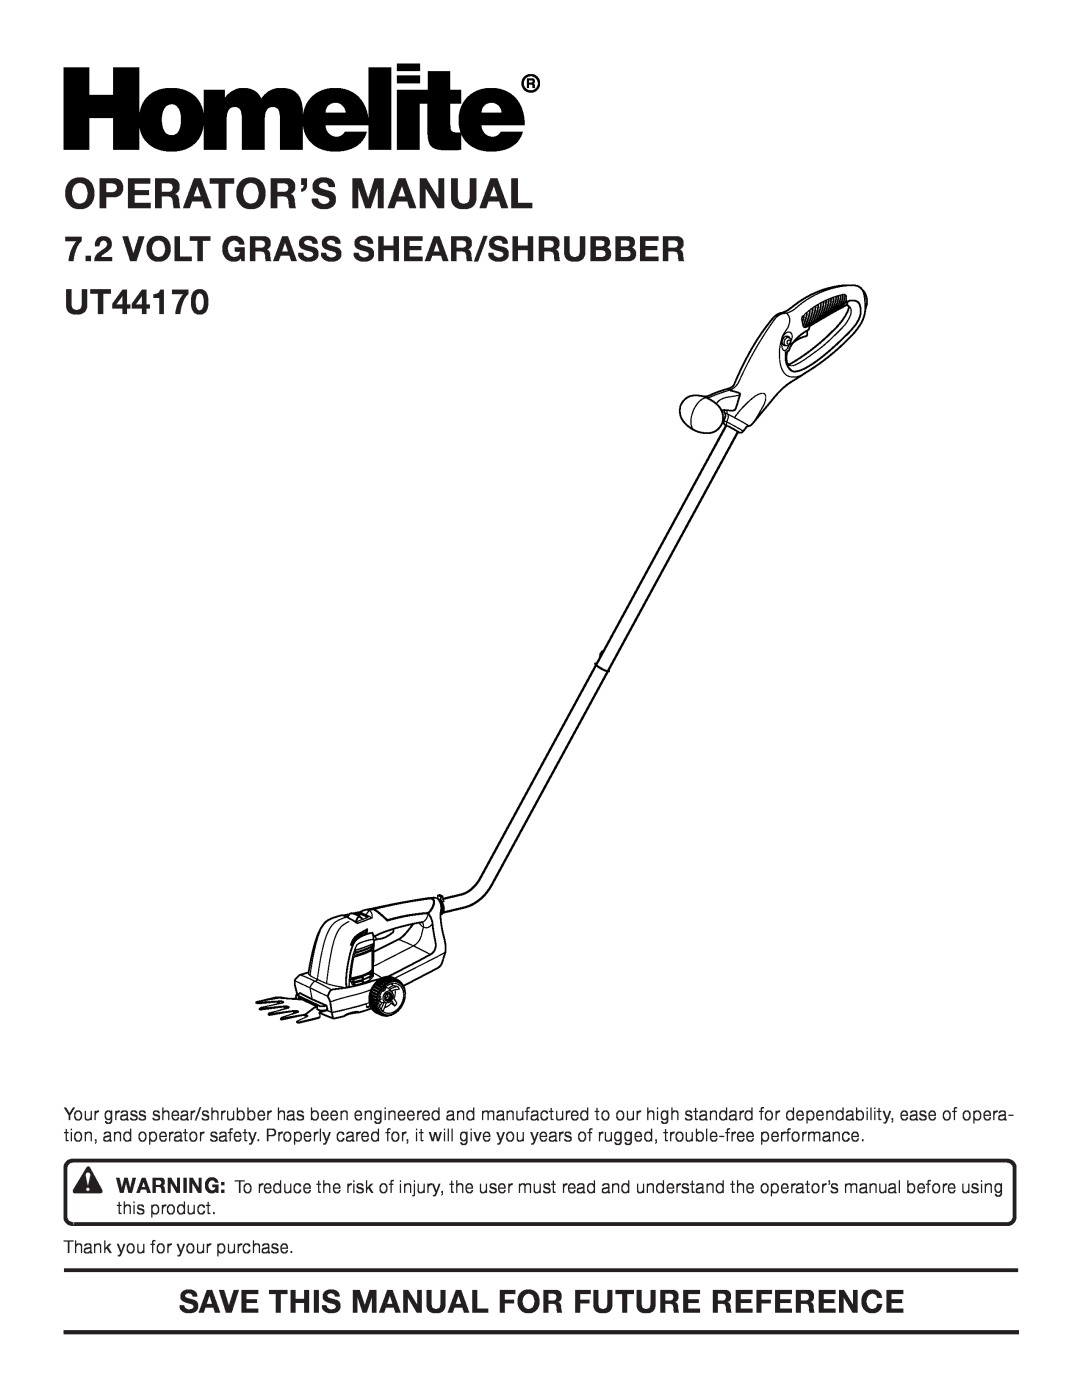 Homelite manual Operator’S Manual, VOLT Grass shear/shrubber UT44170, Save This Manual For Future Reference 